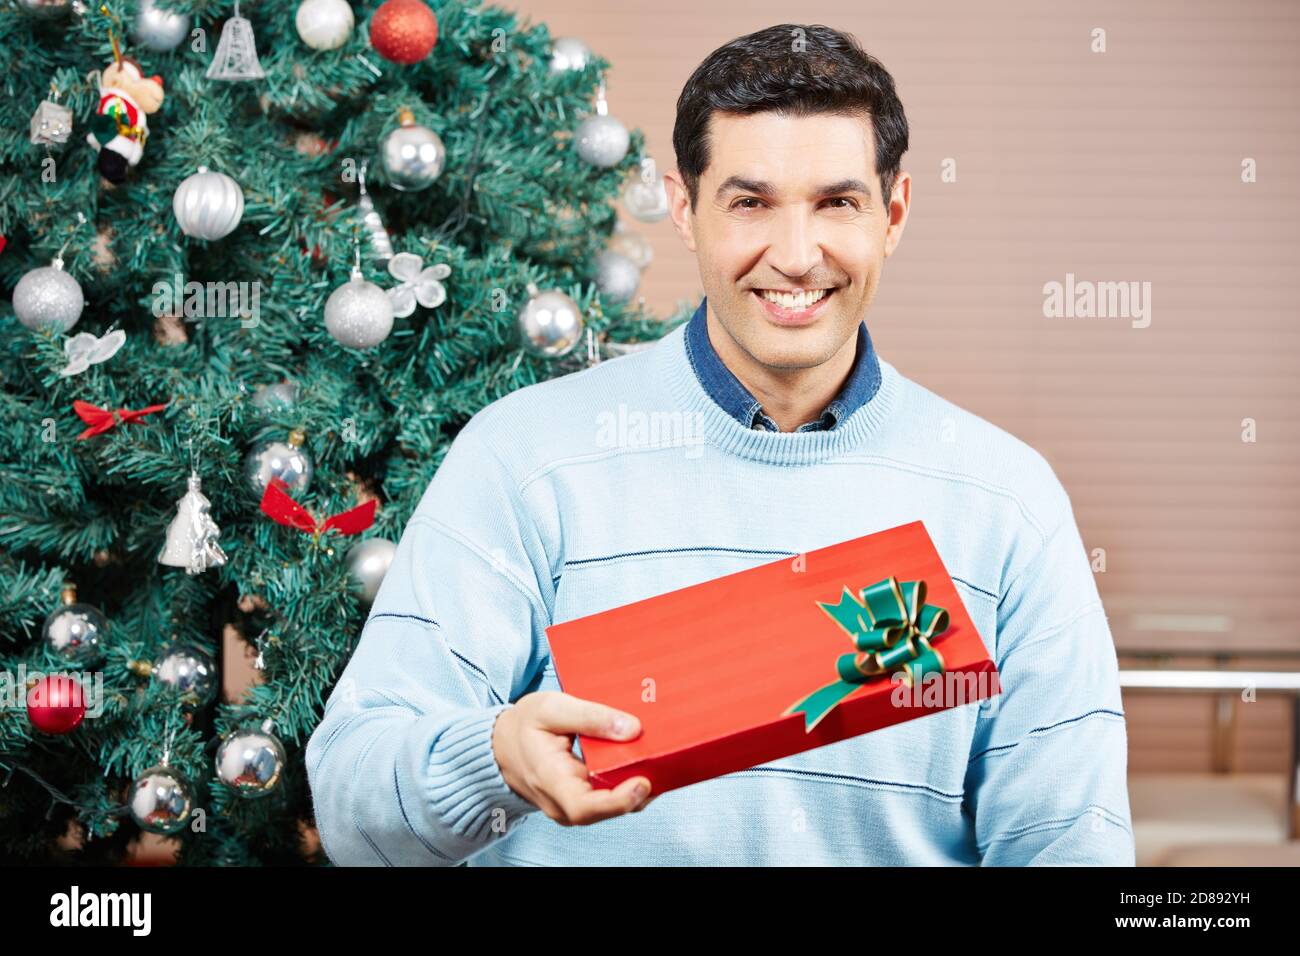 Smiling man with a red Christmas present next to a Christmas tree Stock Photo